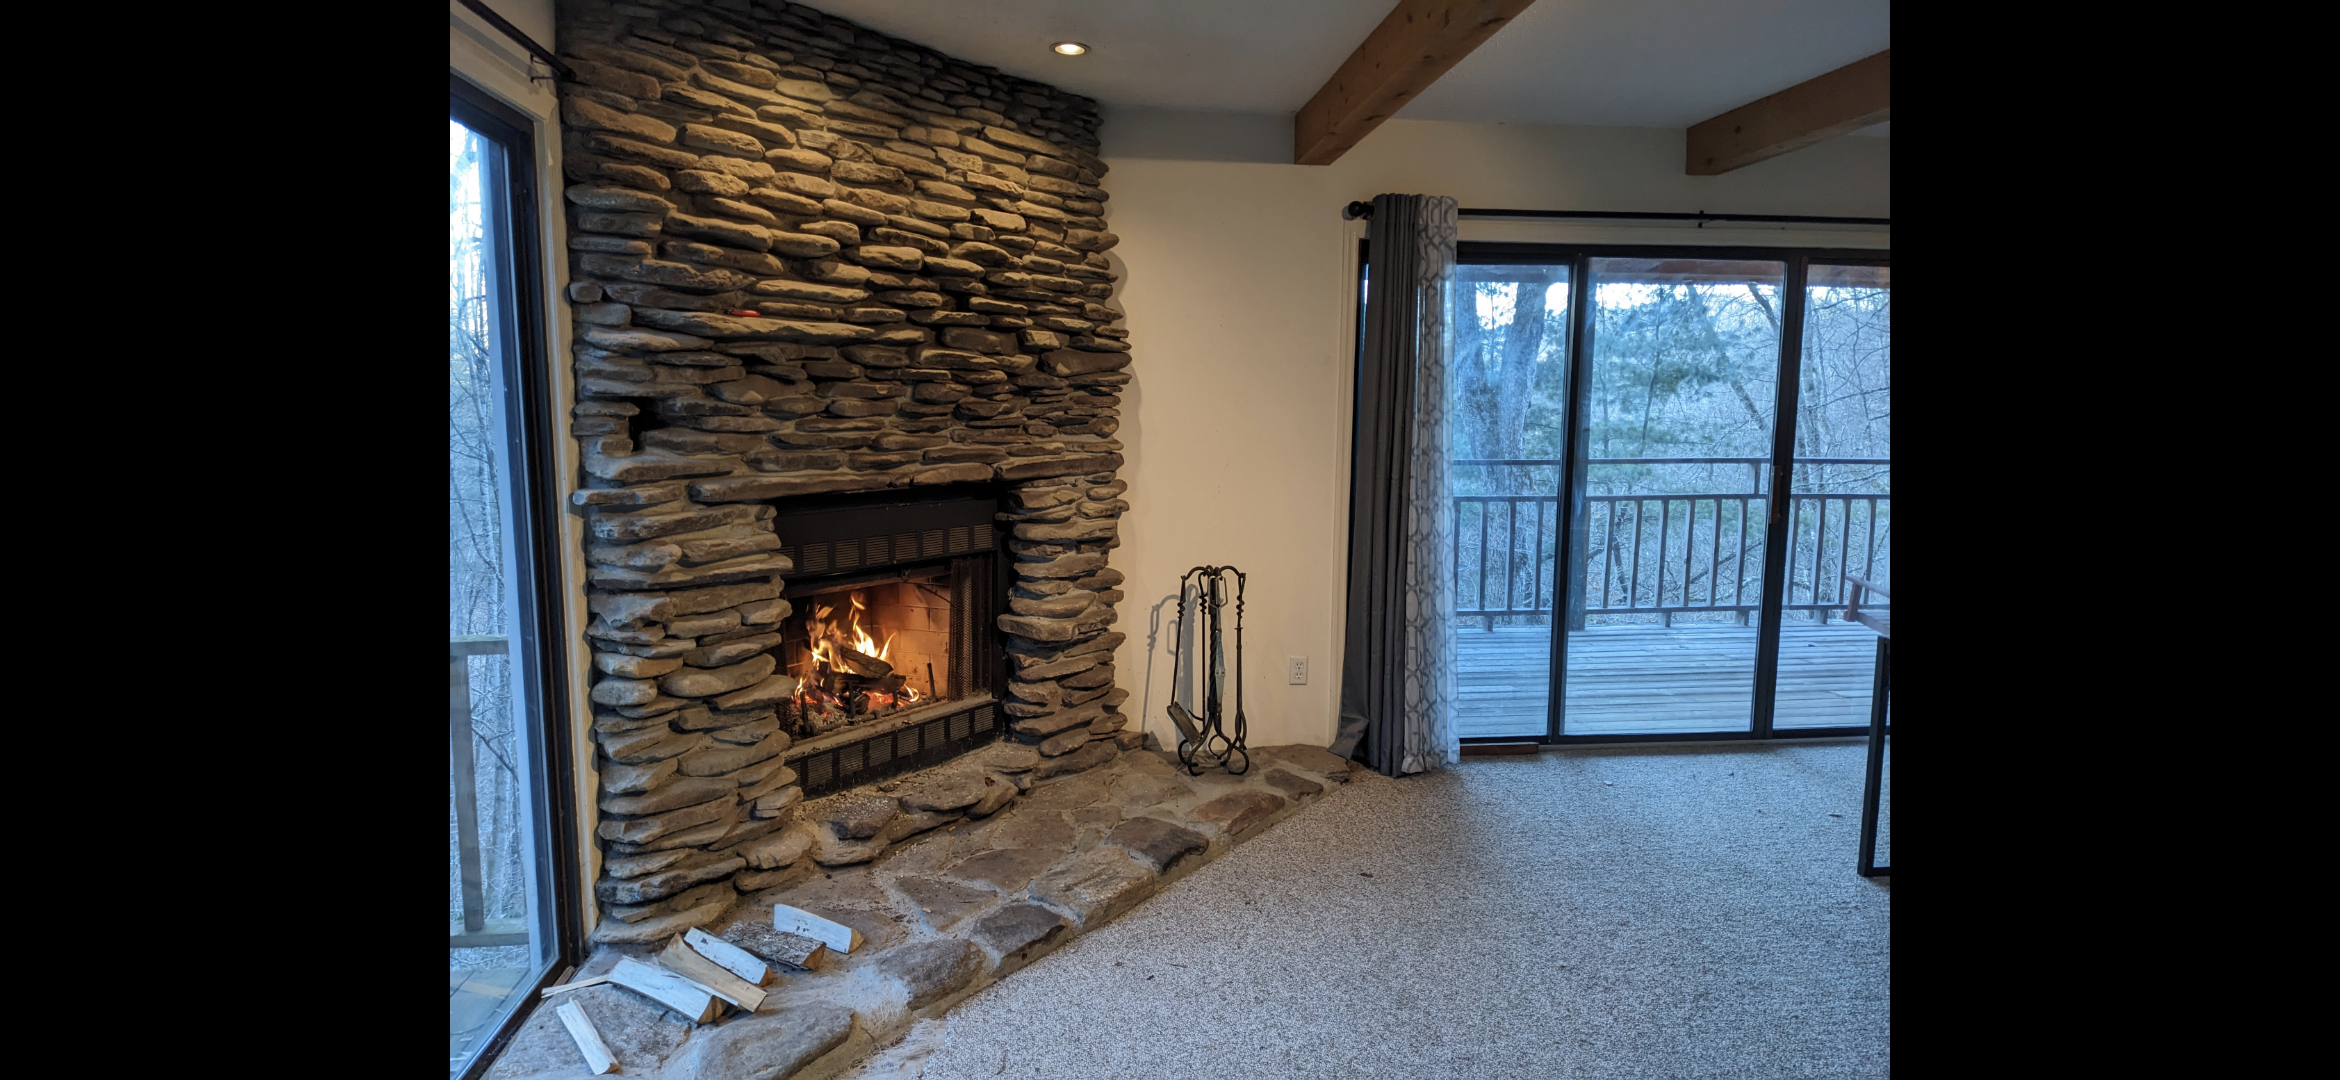 Wood Stove in existing prefab fireplace?